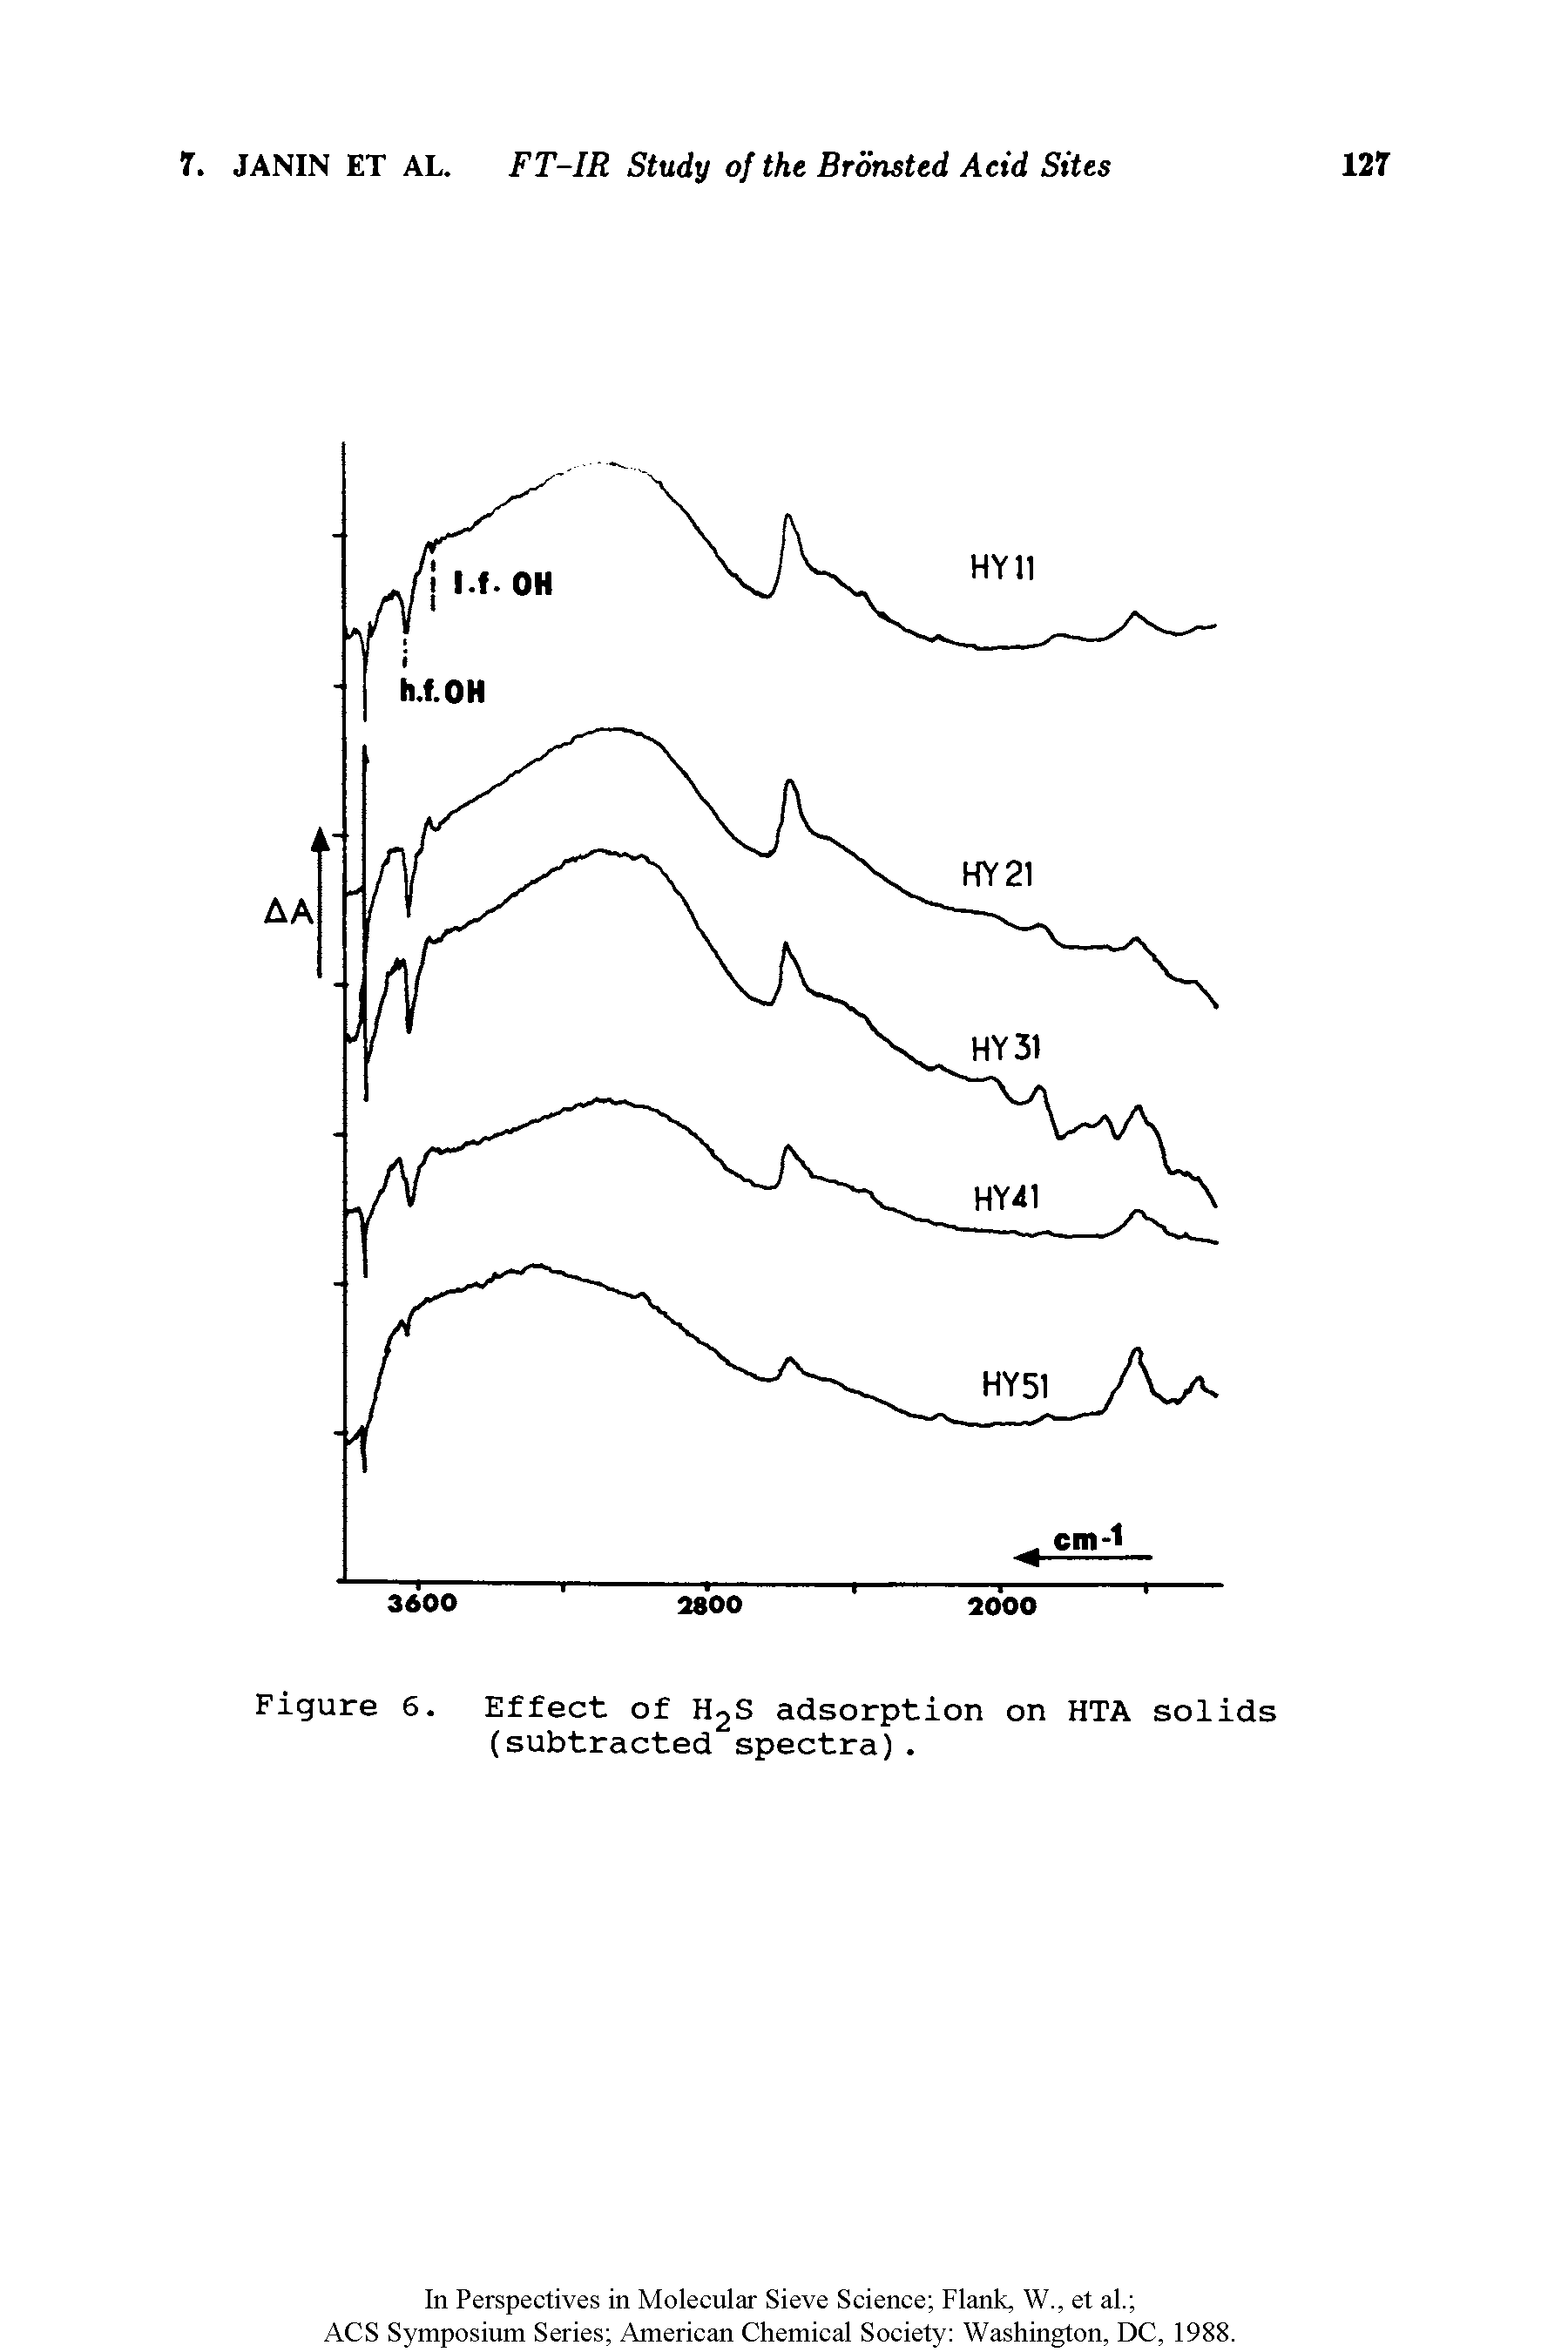 Figure 6. Effect of H2S adsorption on HTA solids (subtracted spectra).